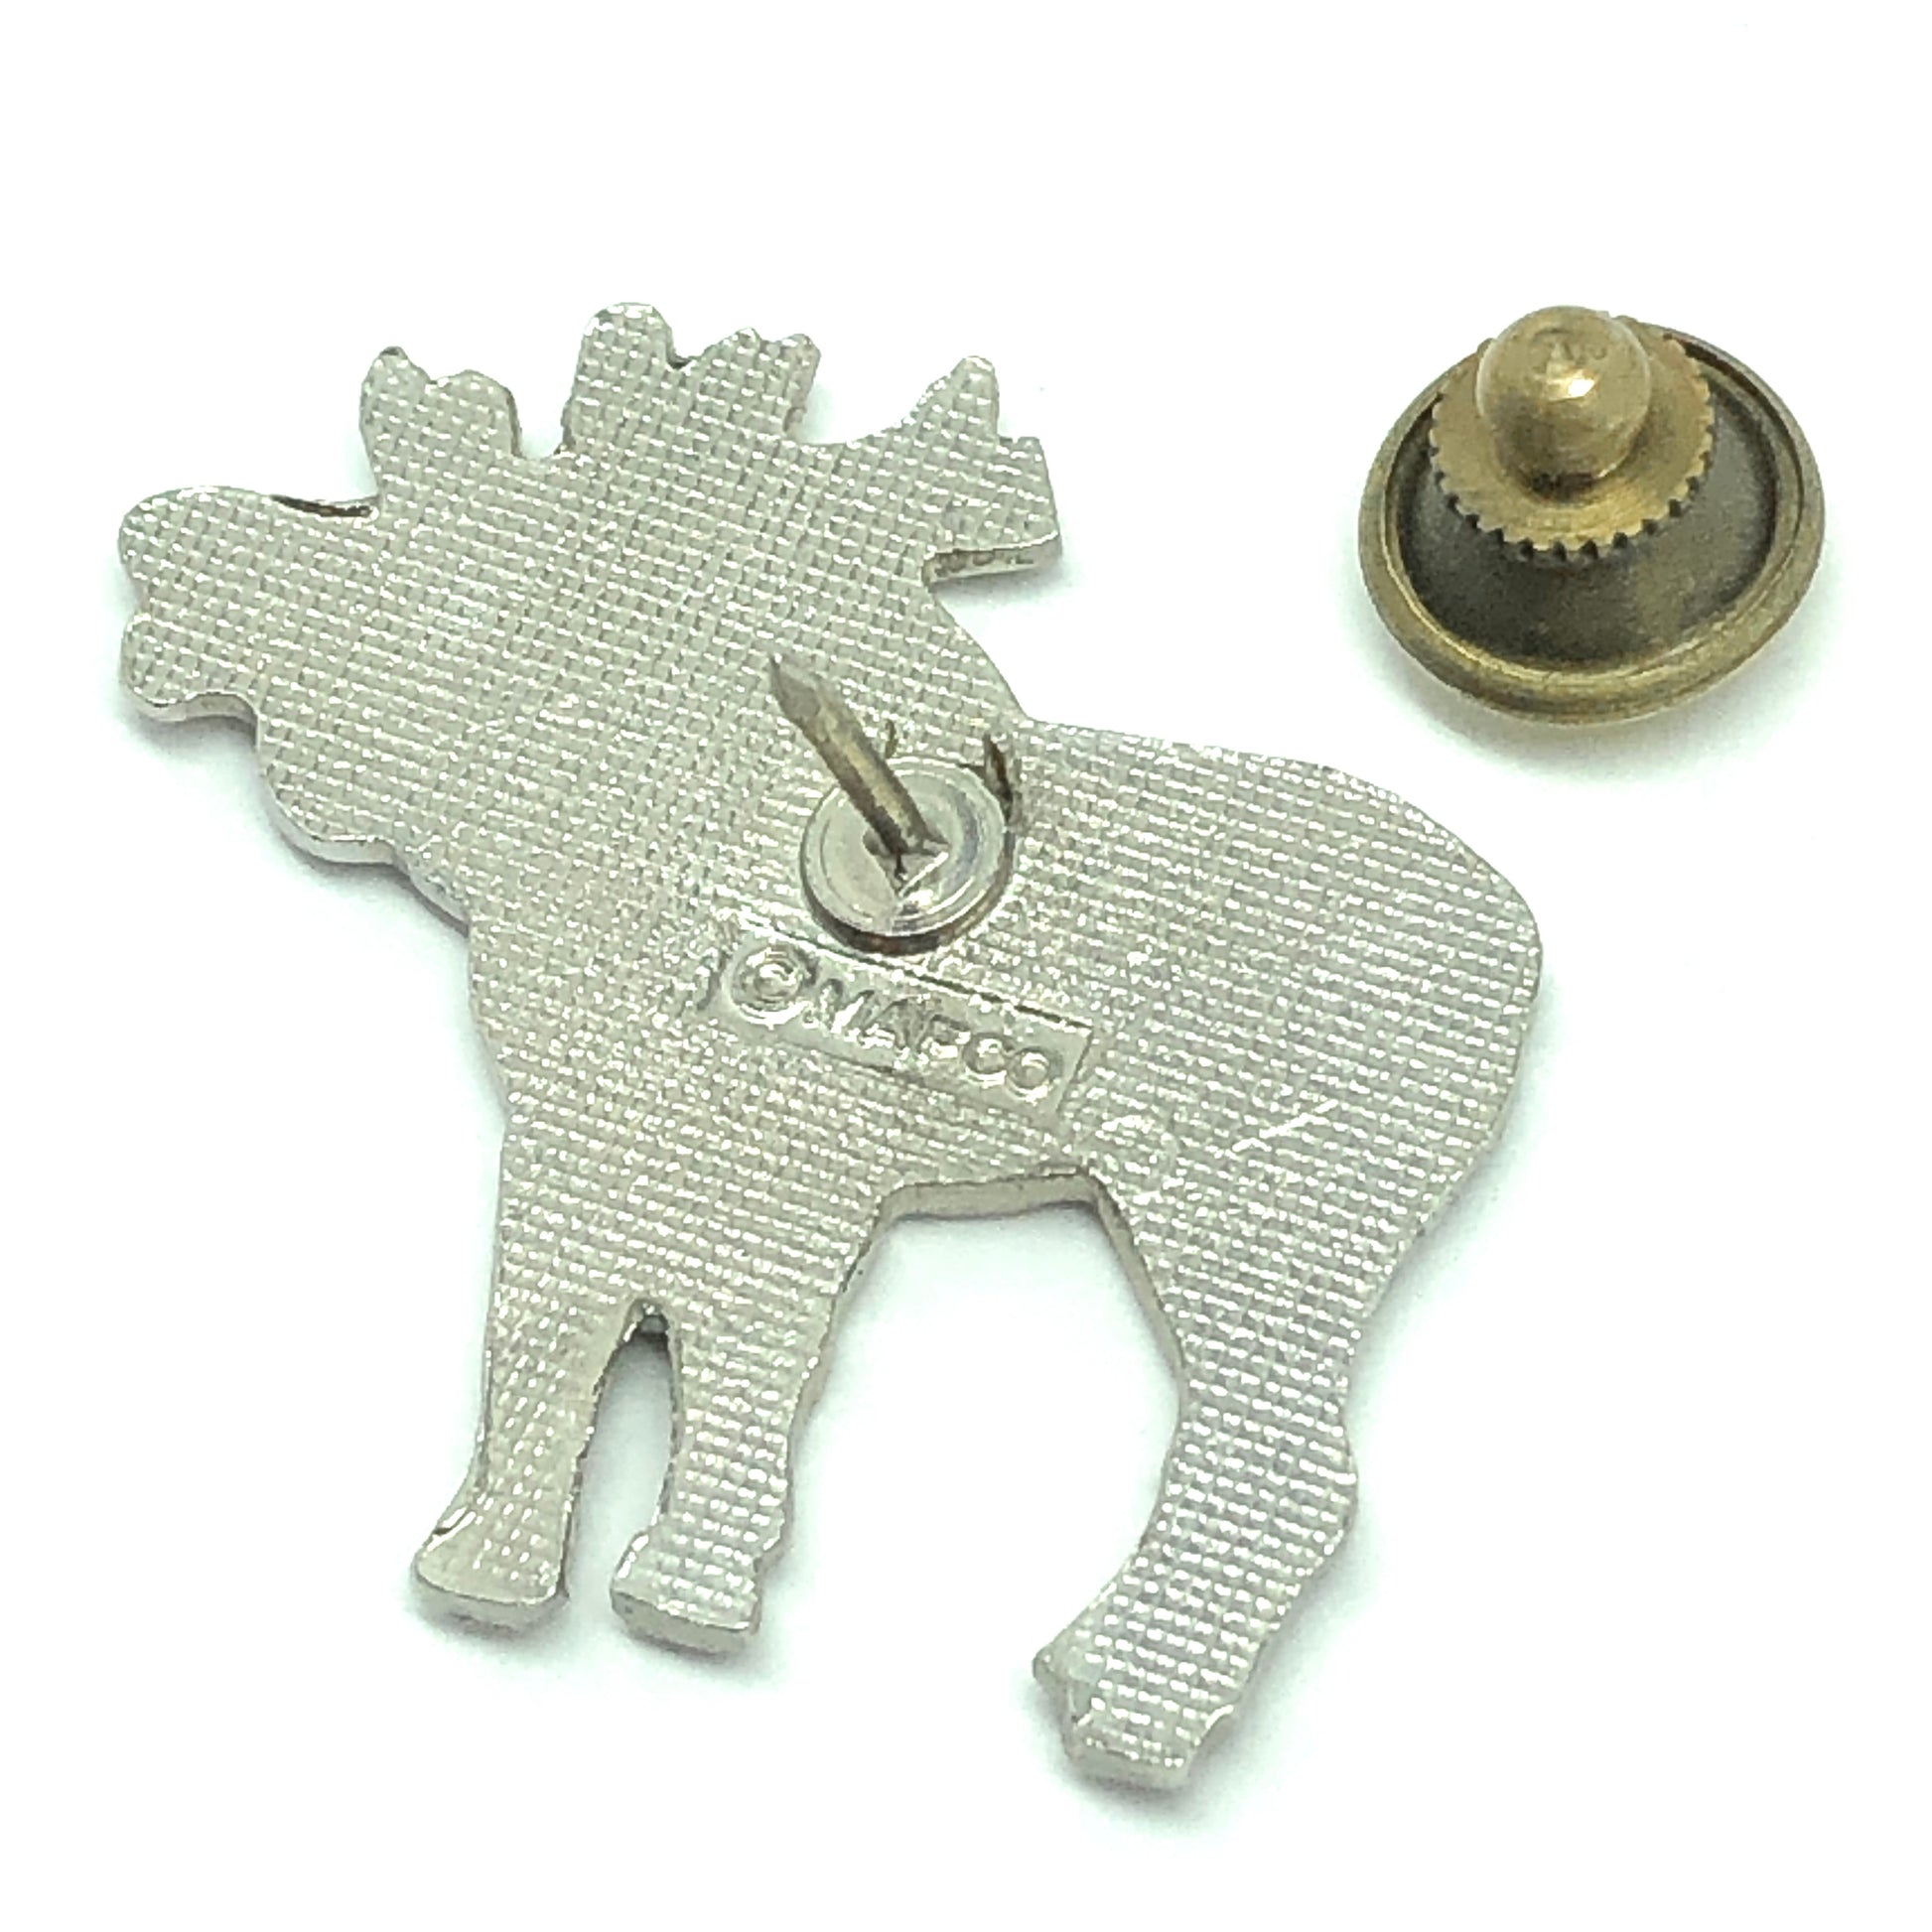 Tie Tack anti spin tooth on Vintage Outdoorsy Moose Pin